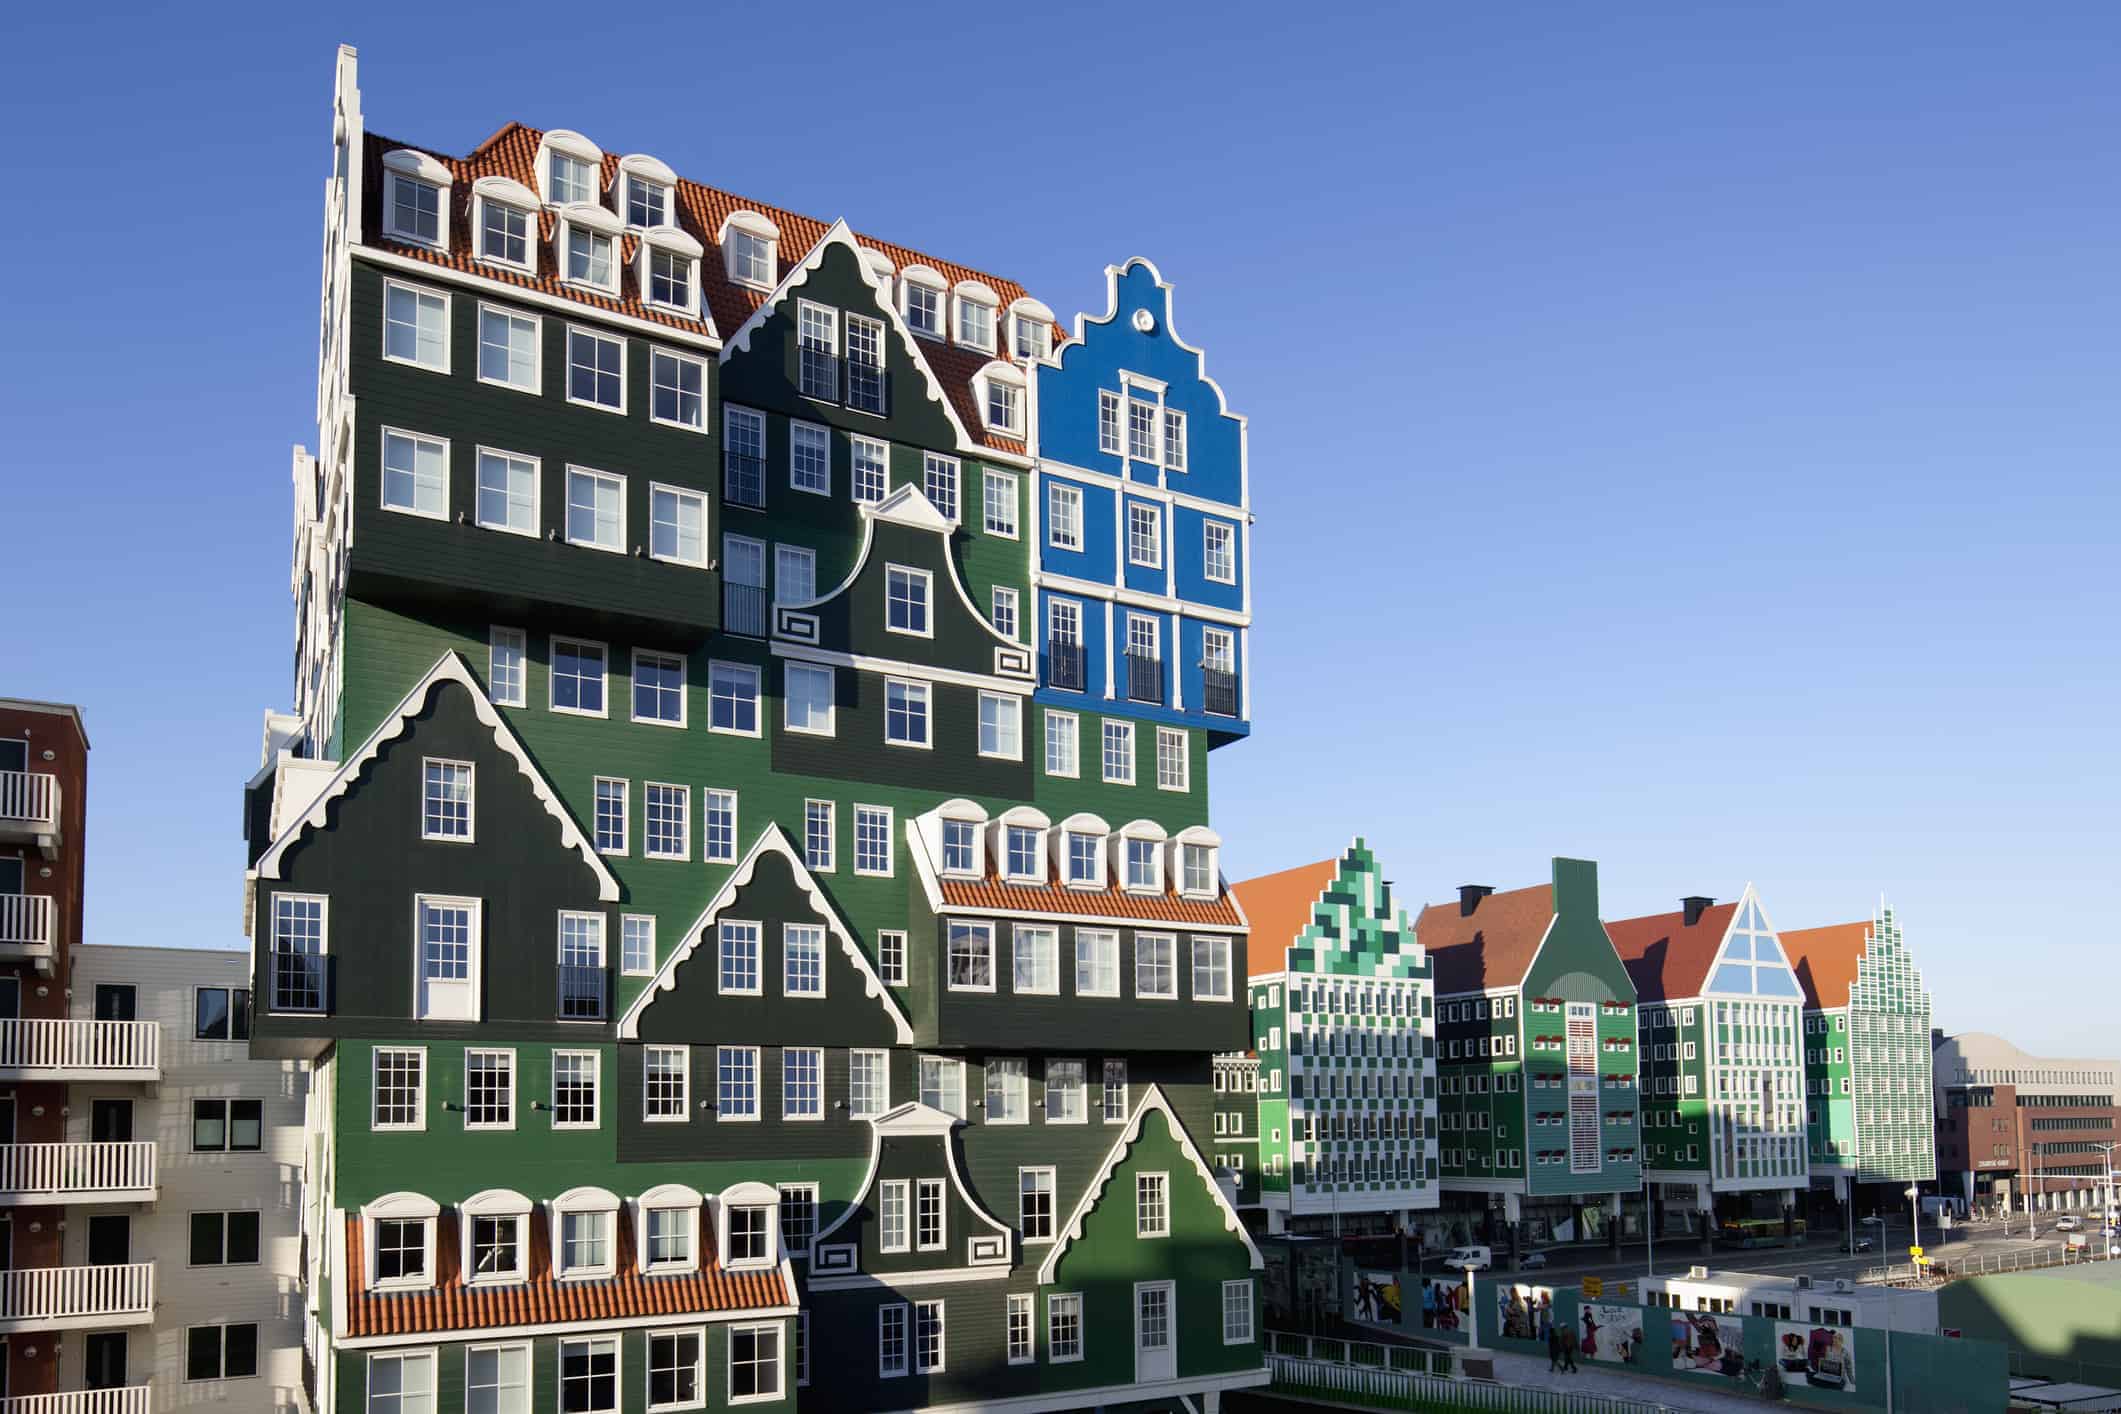 Explore the world’s most remarkable buildings